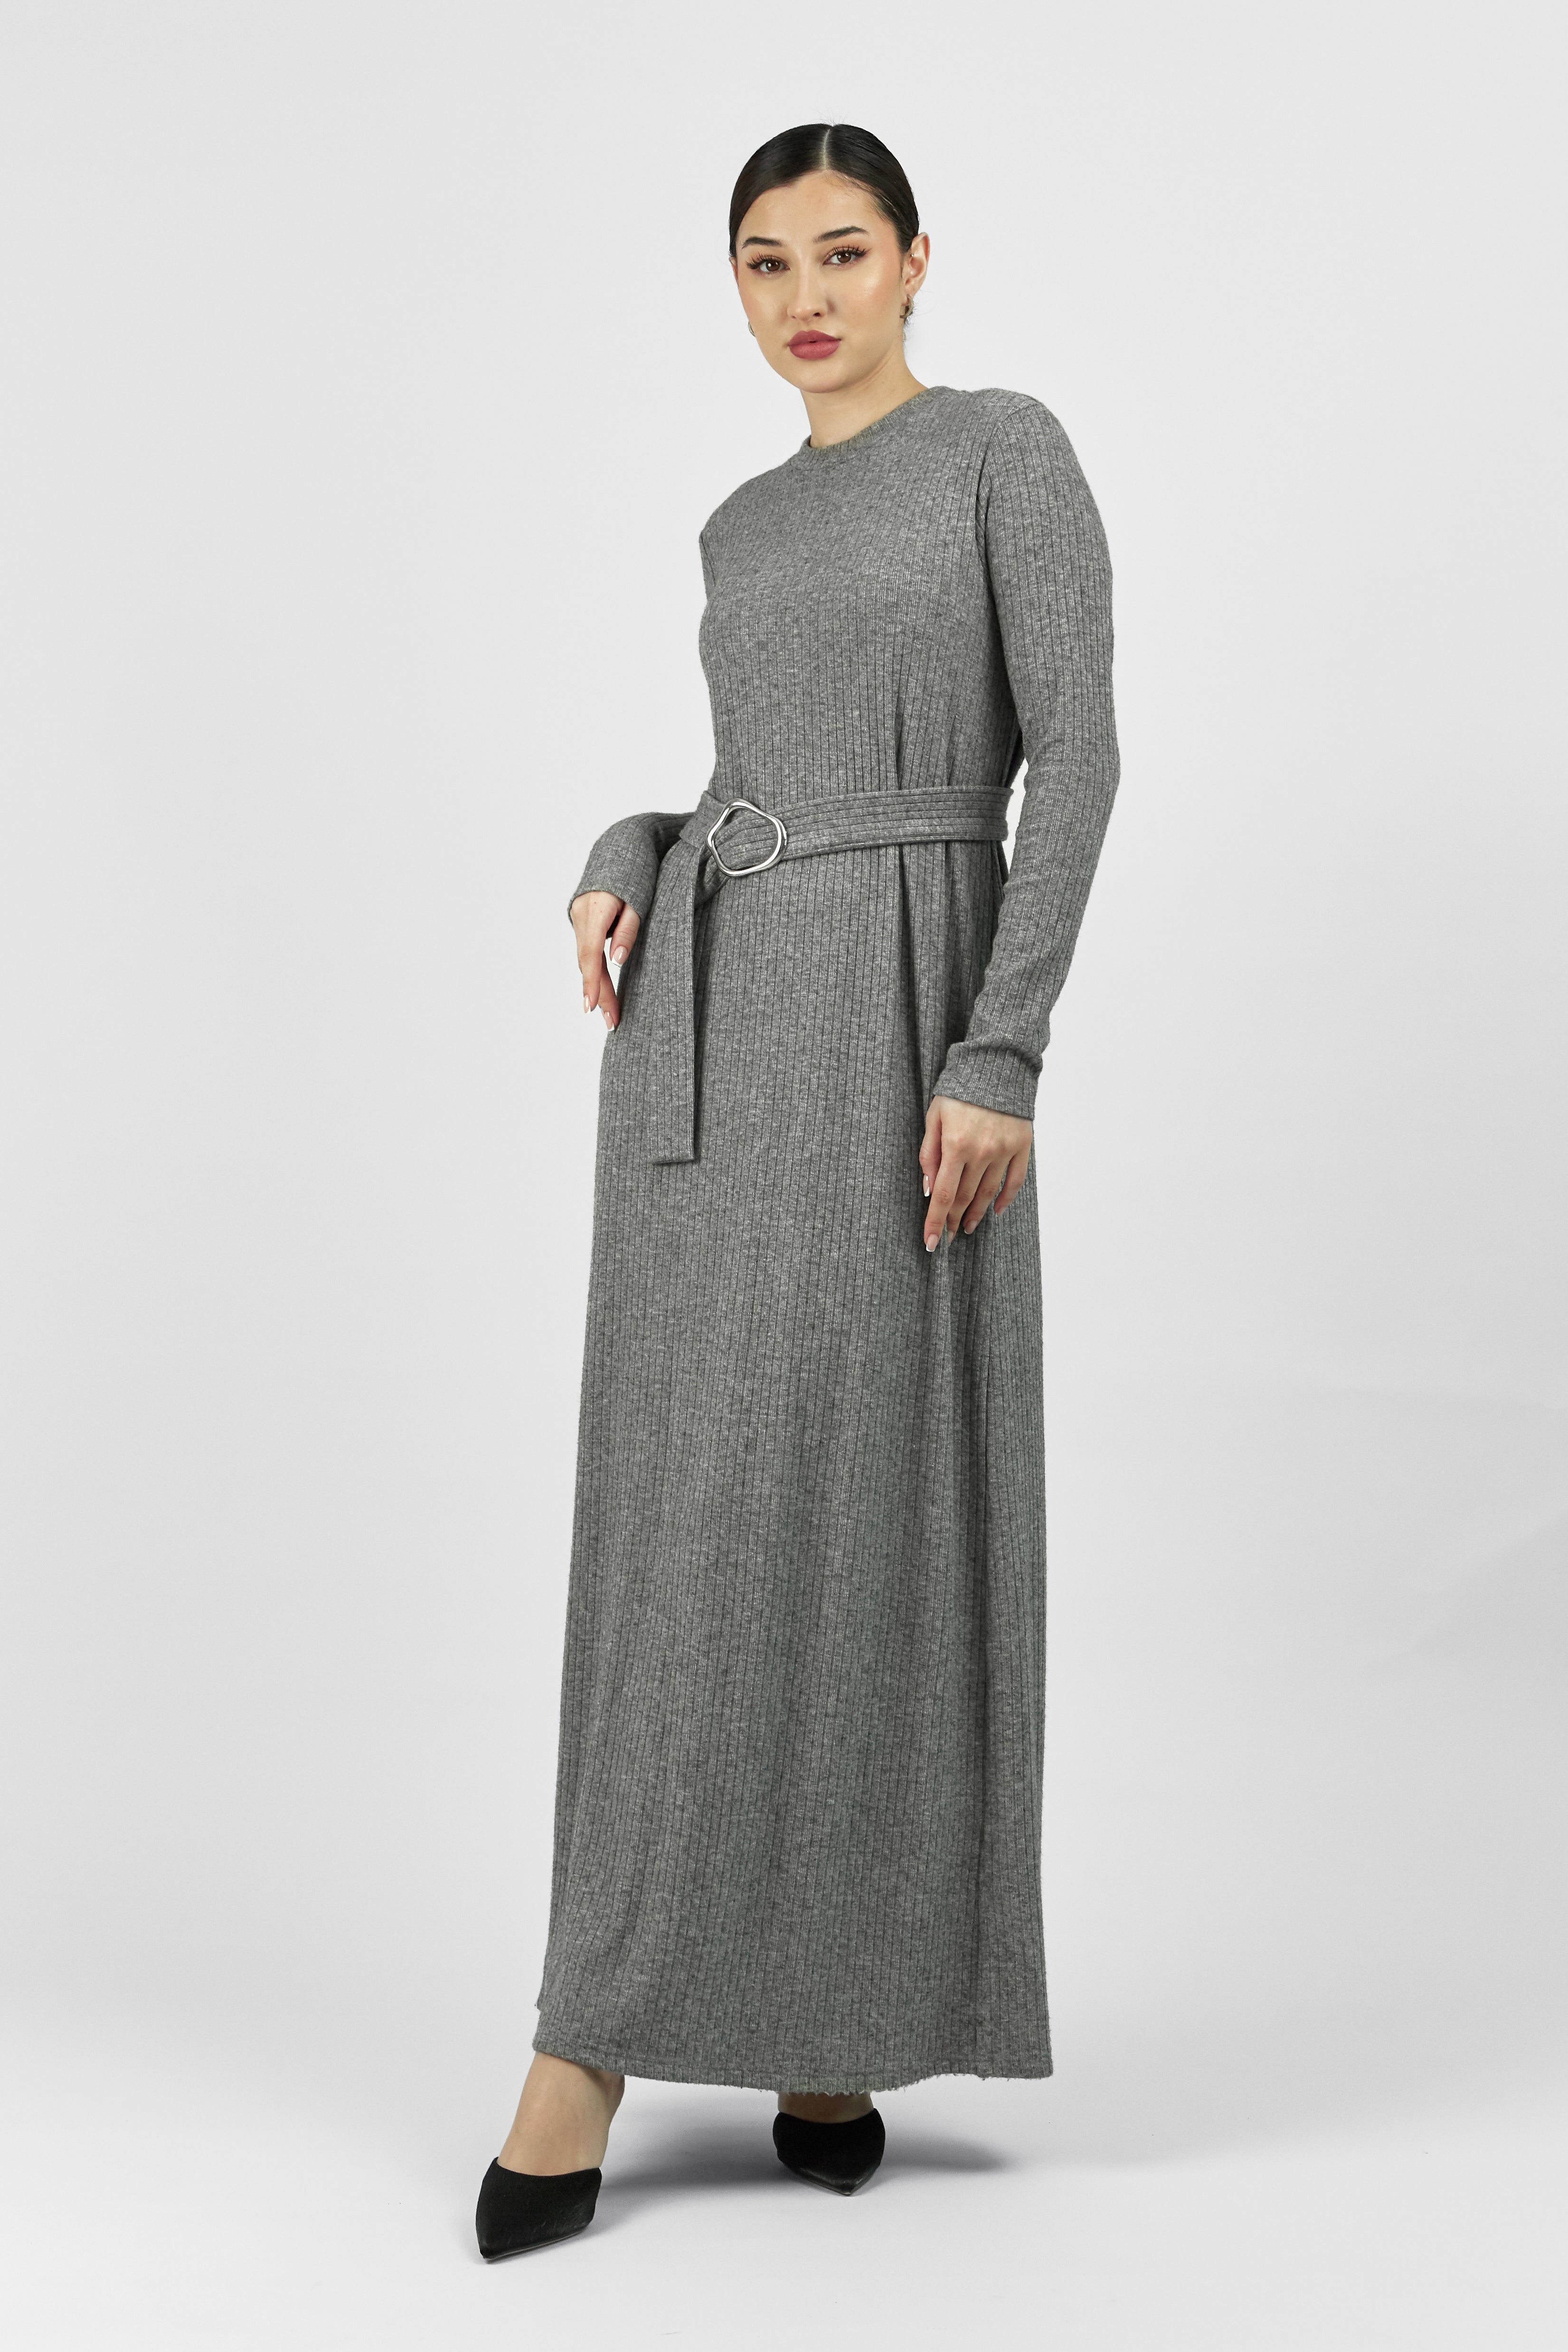 AE - Belted Knit Dress - Heather Grey